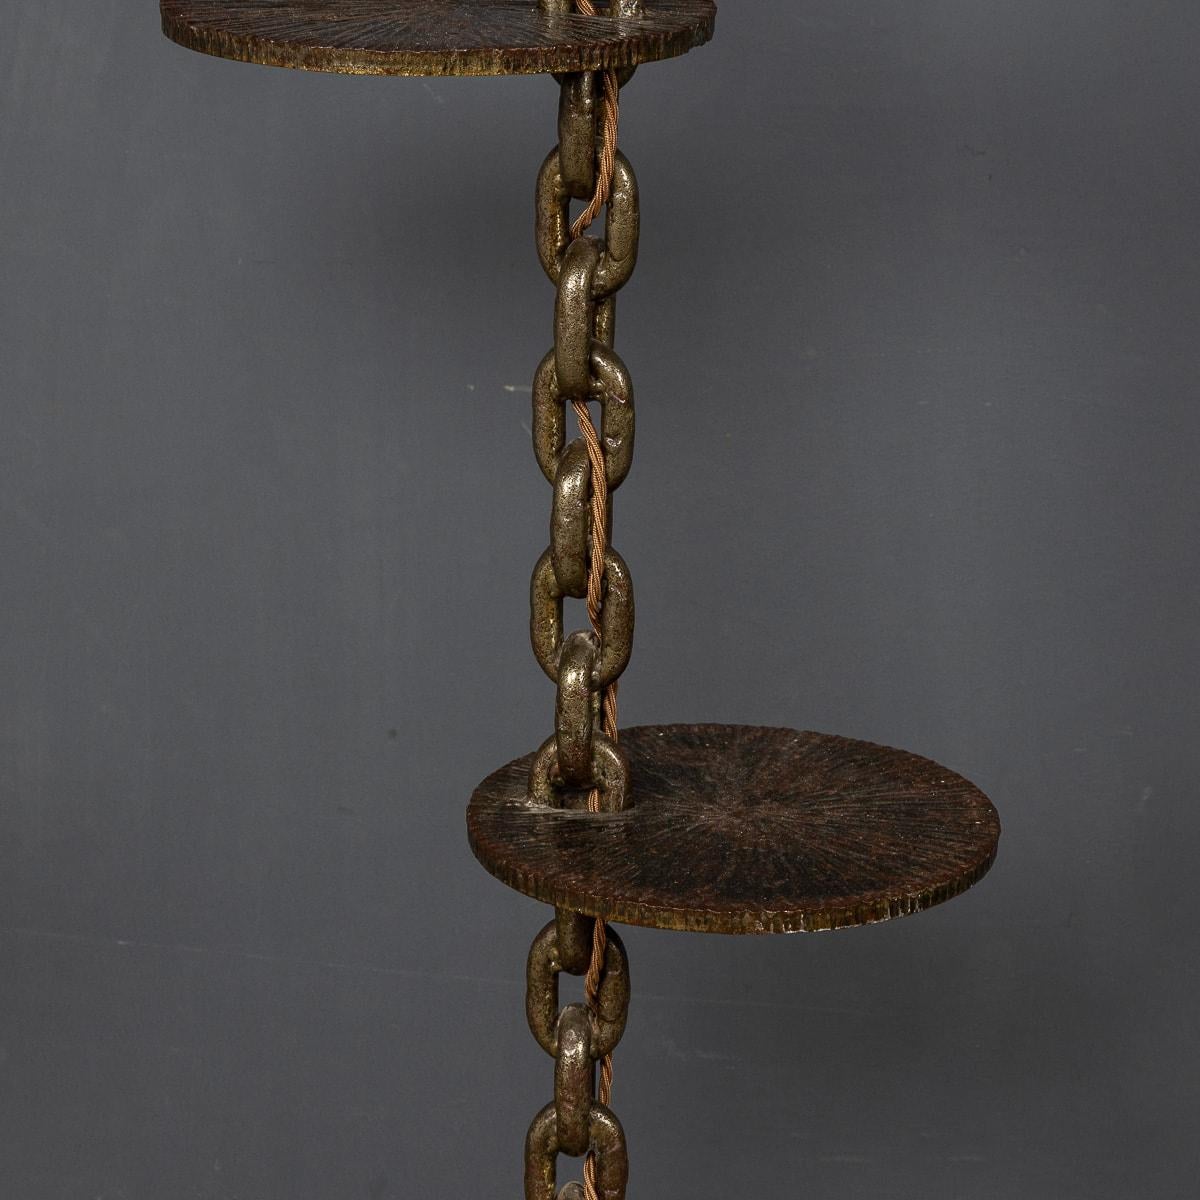 20th Century French Anchor Chain Freestanding Lamp with Shelves, circa 1930 For Sale 7